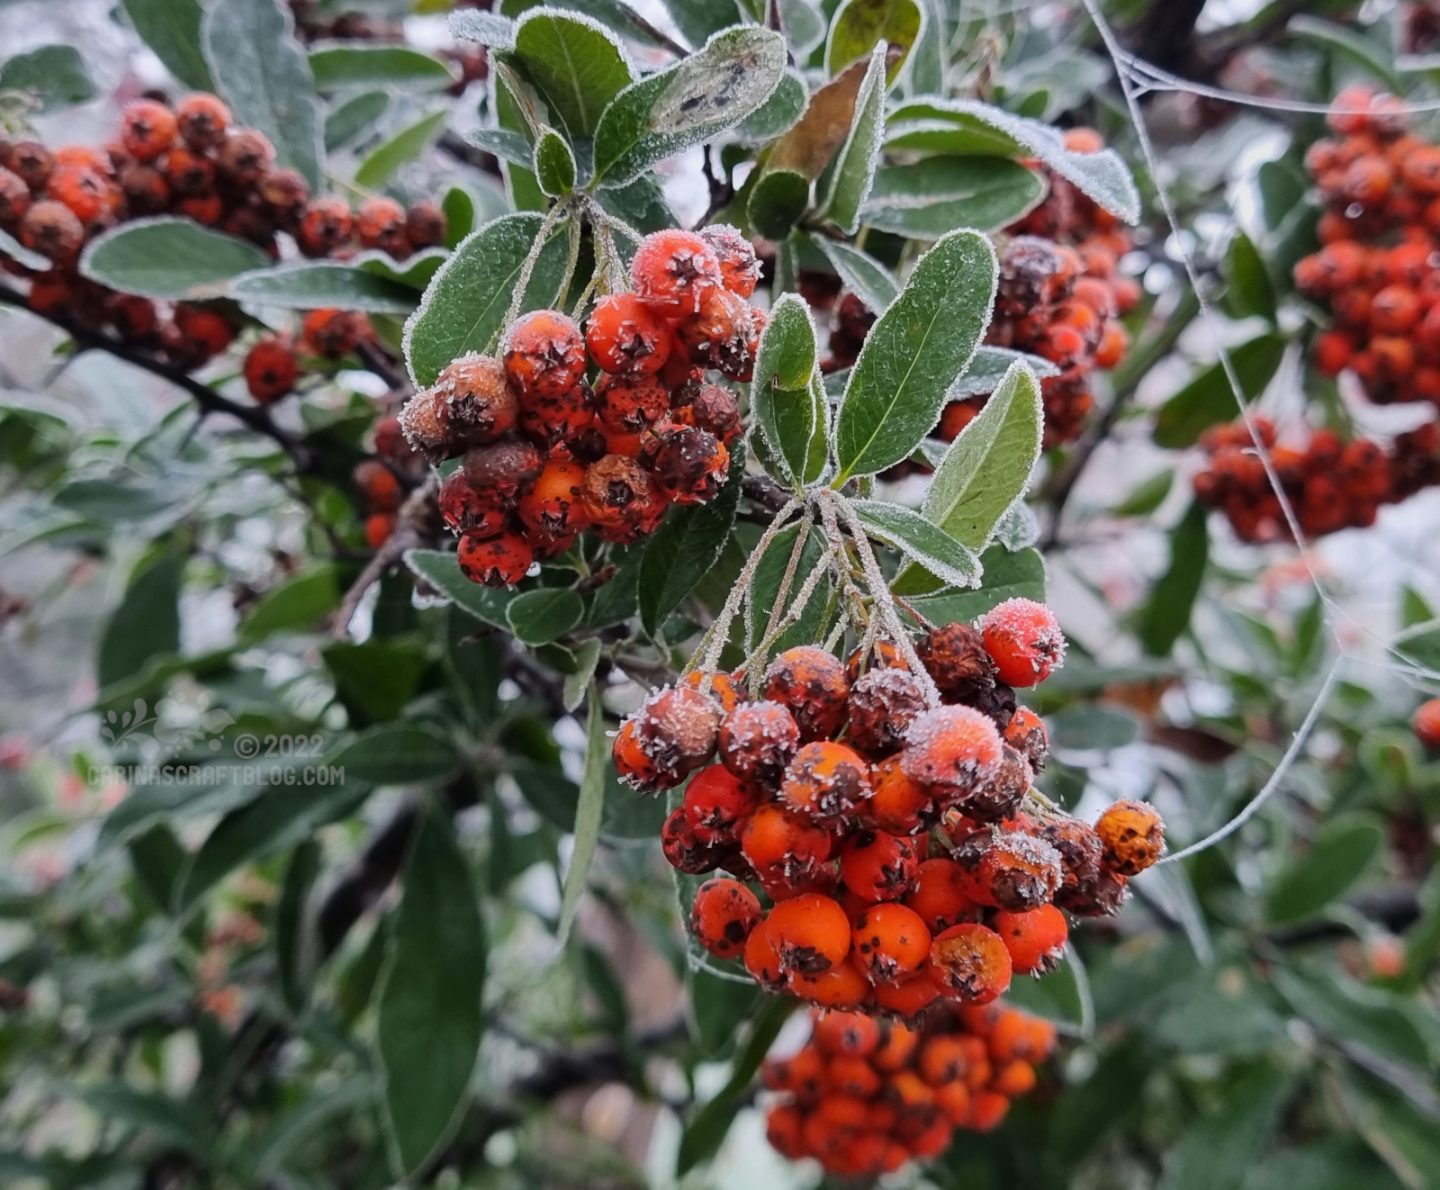 Rowan berries covered in frost.